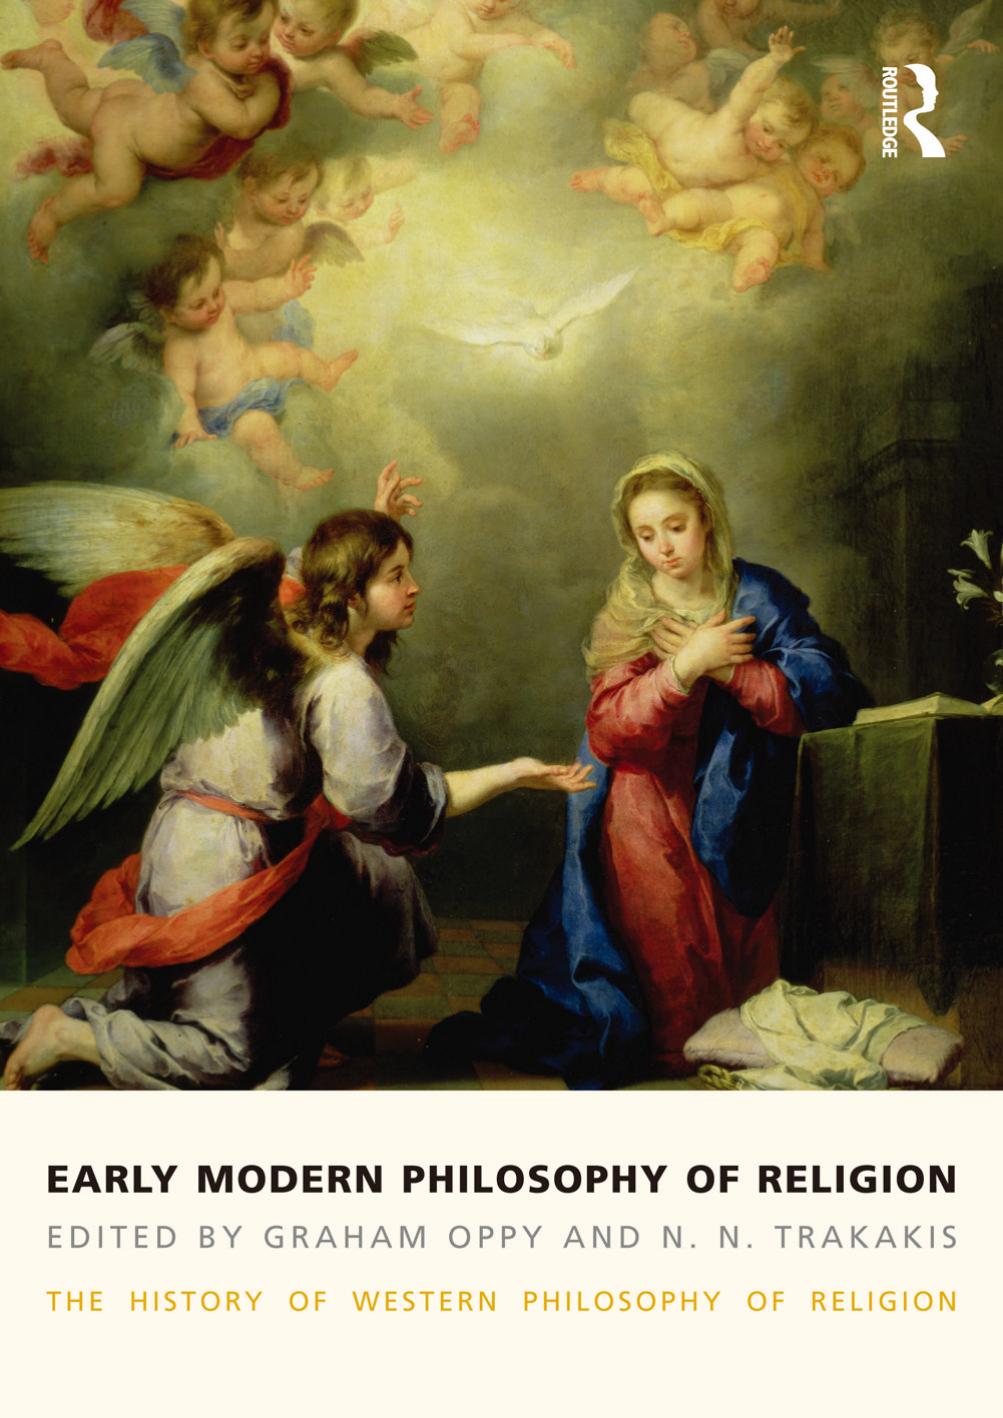 Early Modern Philosophy of Religion: The History of Western Philosophy of Religion